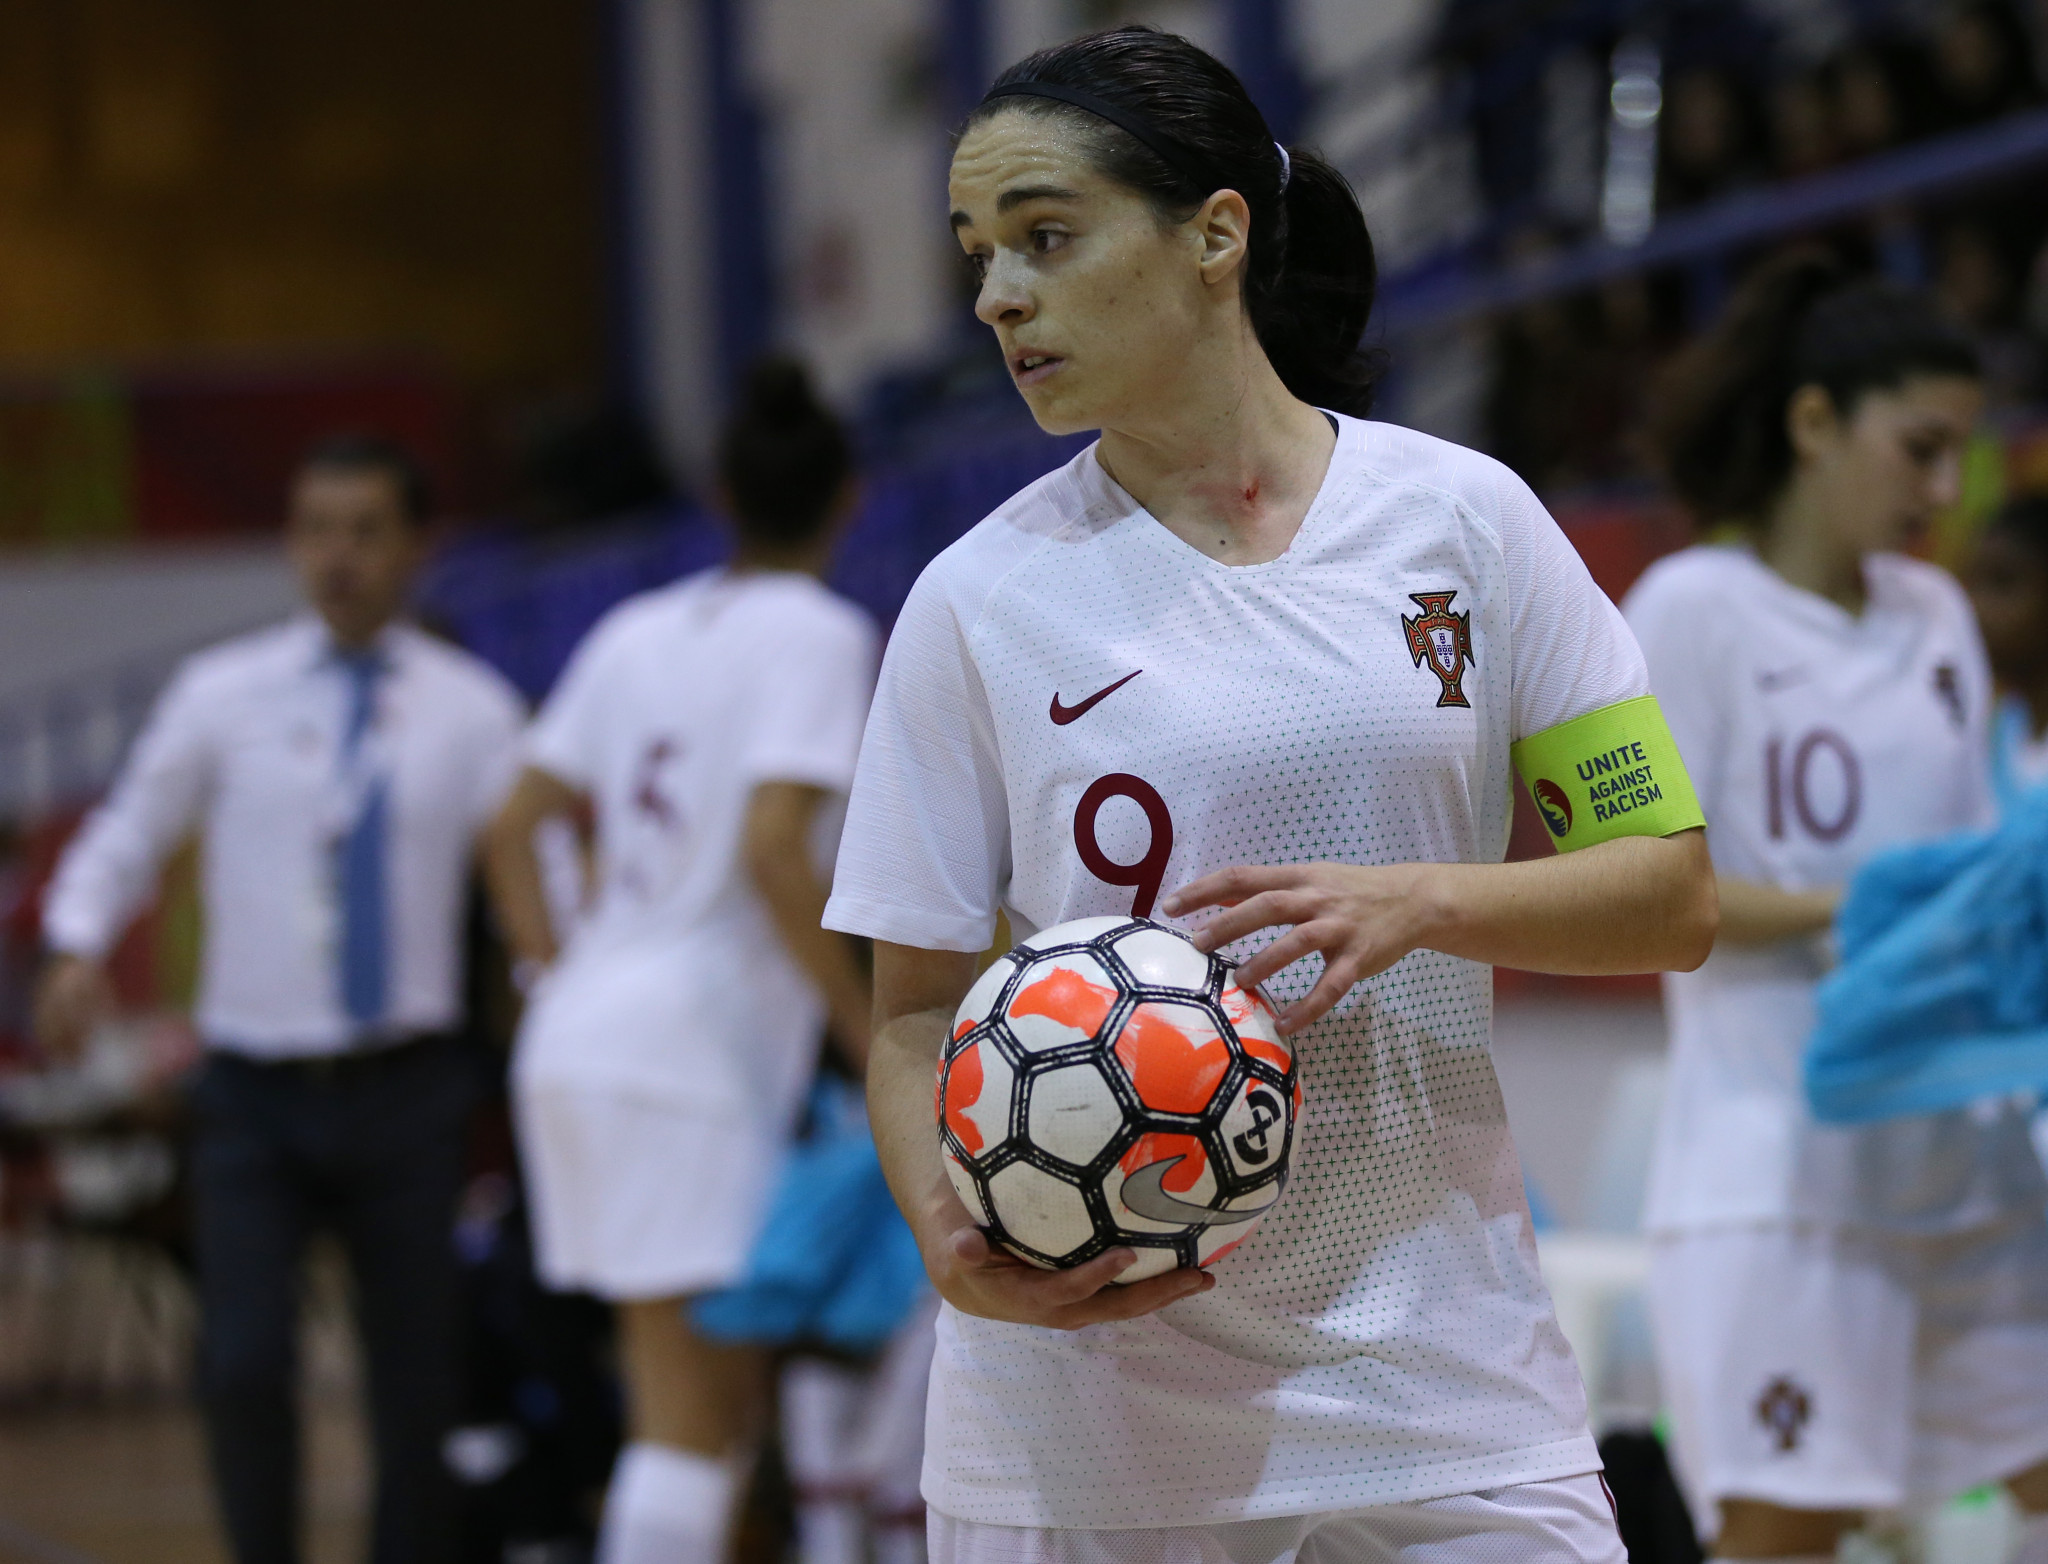 Final four vie for medals at UEFA Women's Futsal Euro 2022